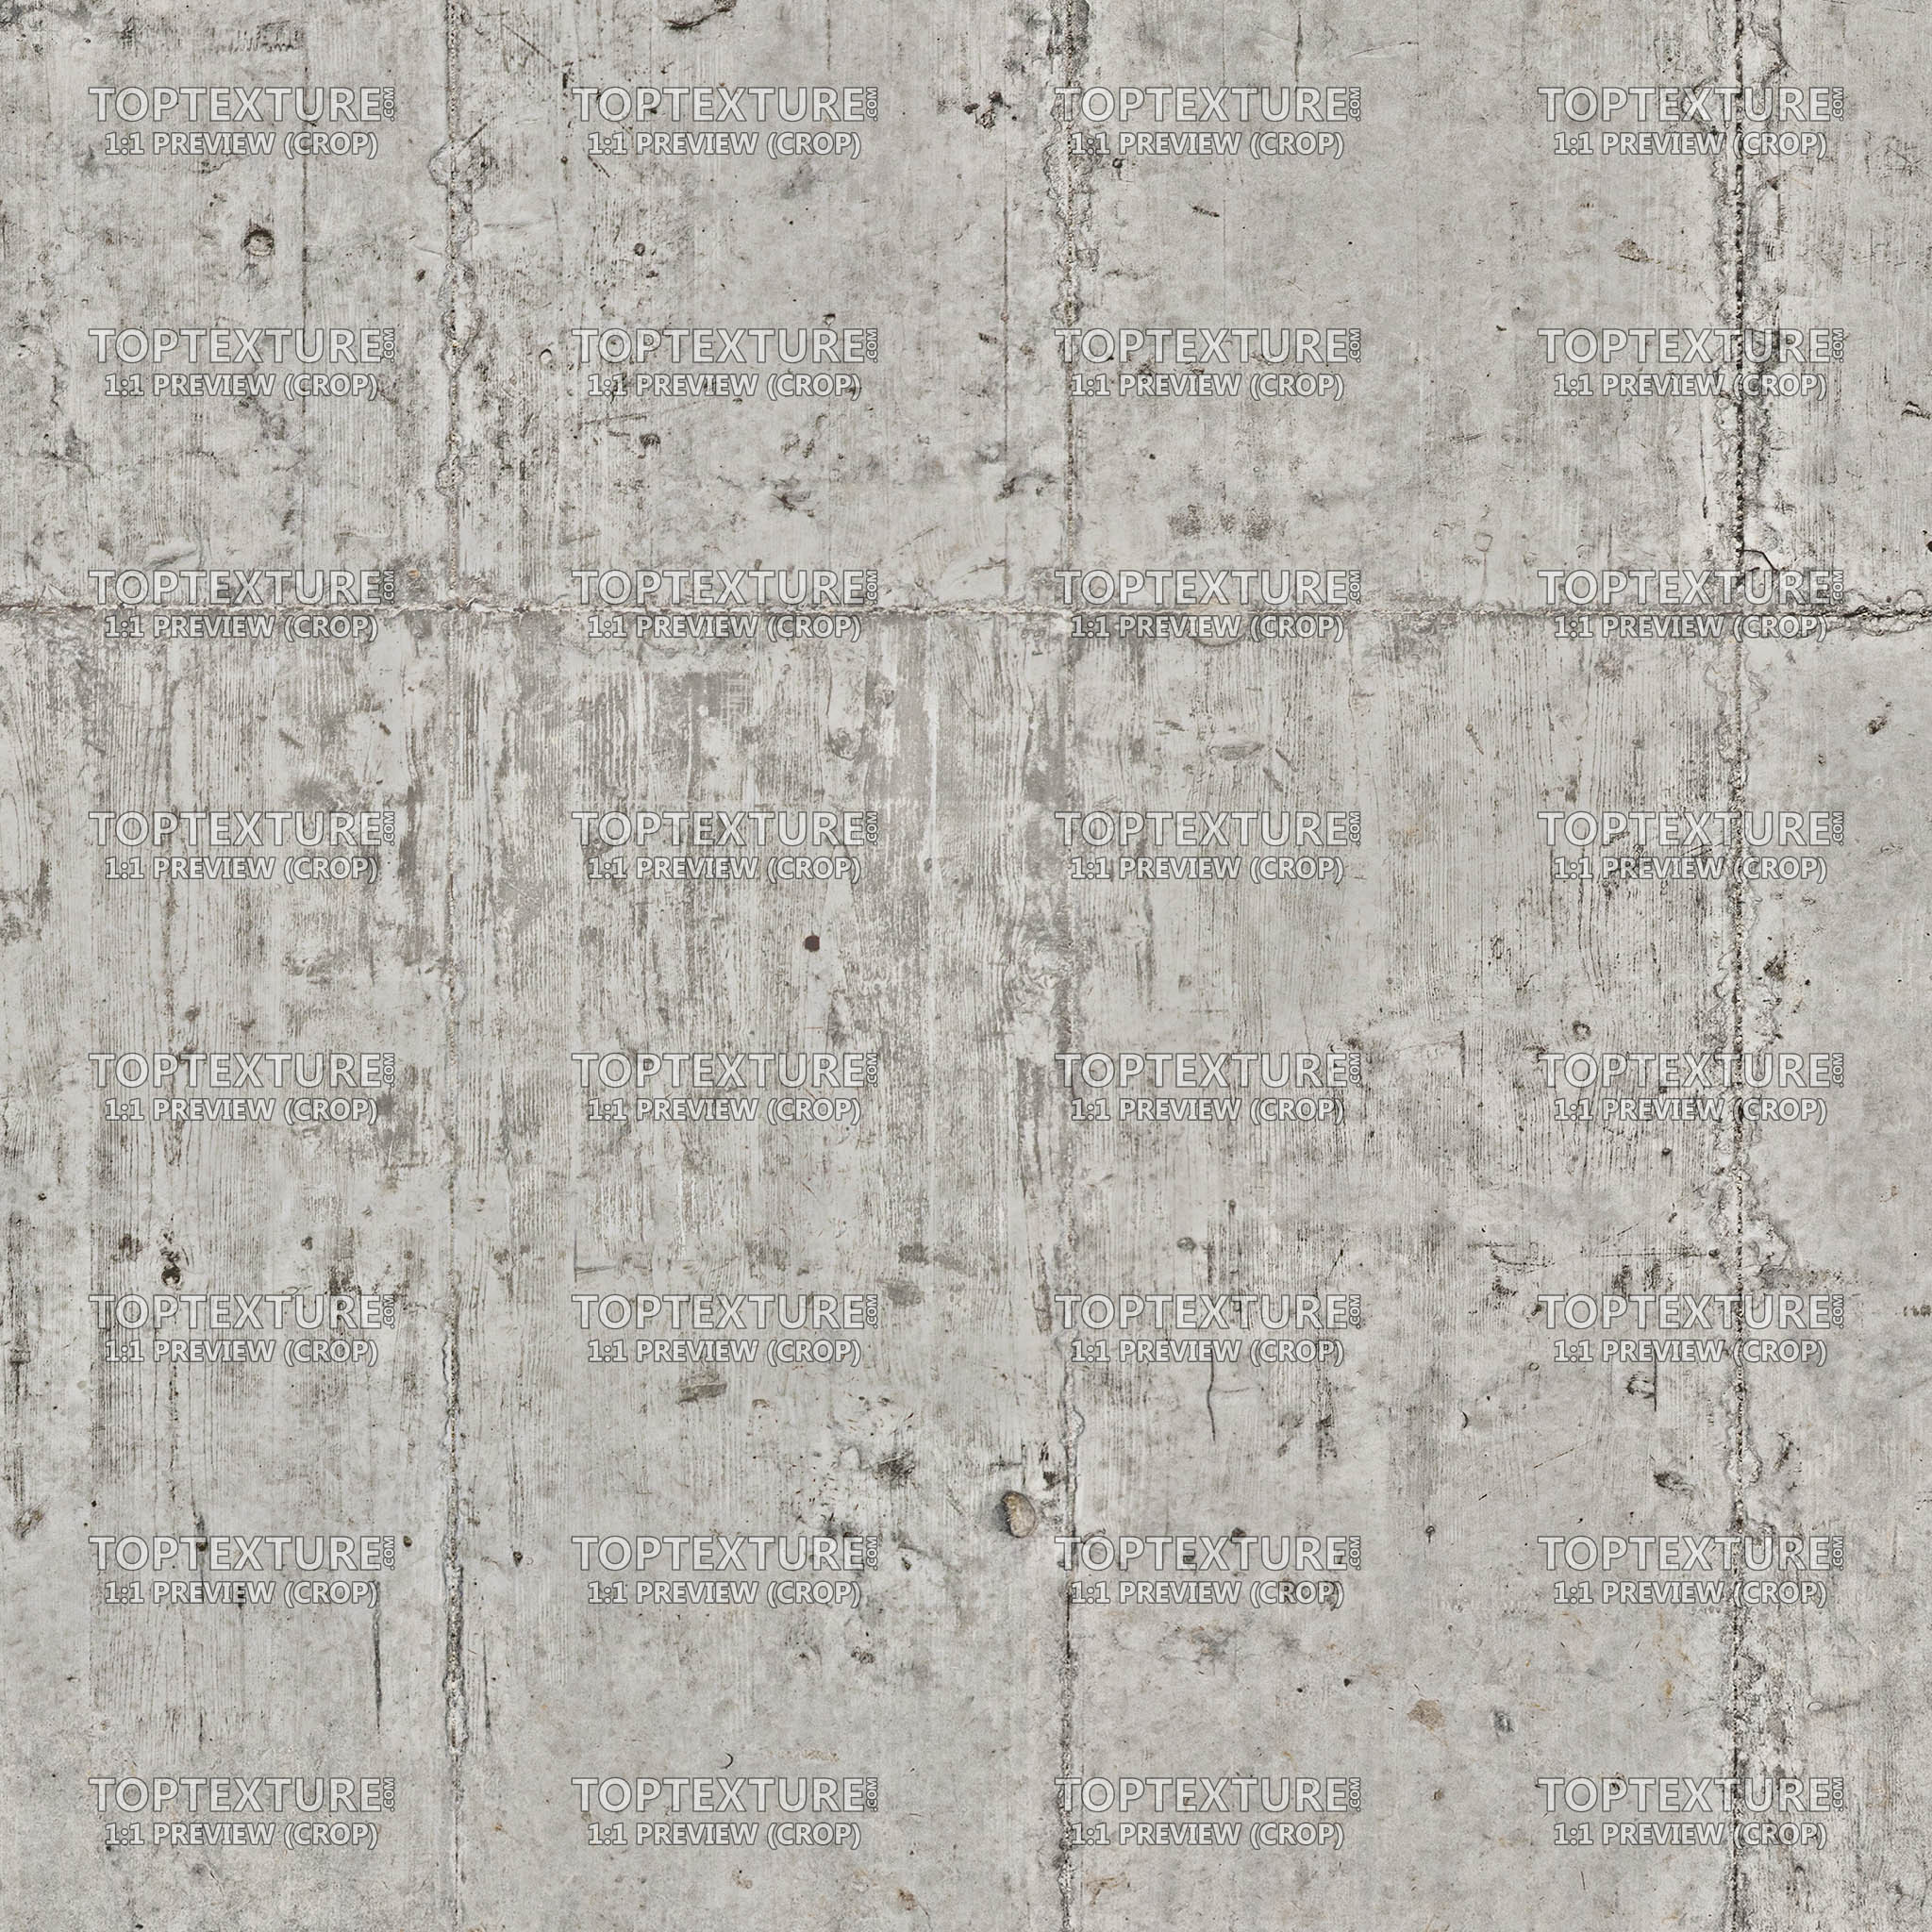 Long Concrete Wall Shuttering Shapes - Top Texture